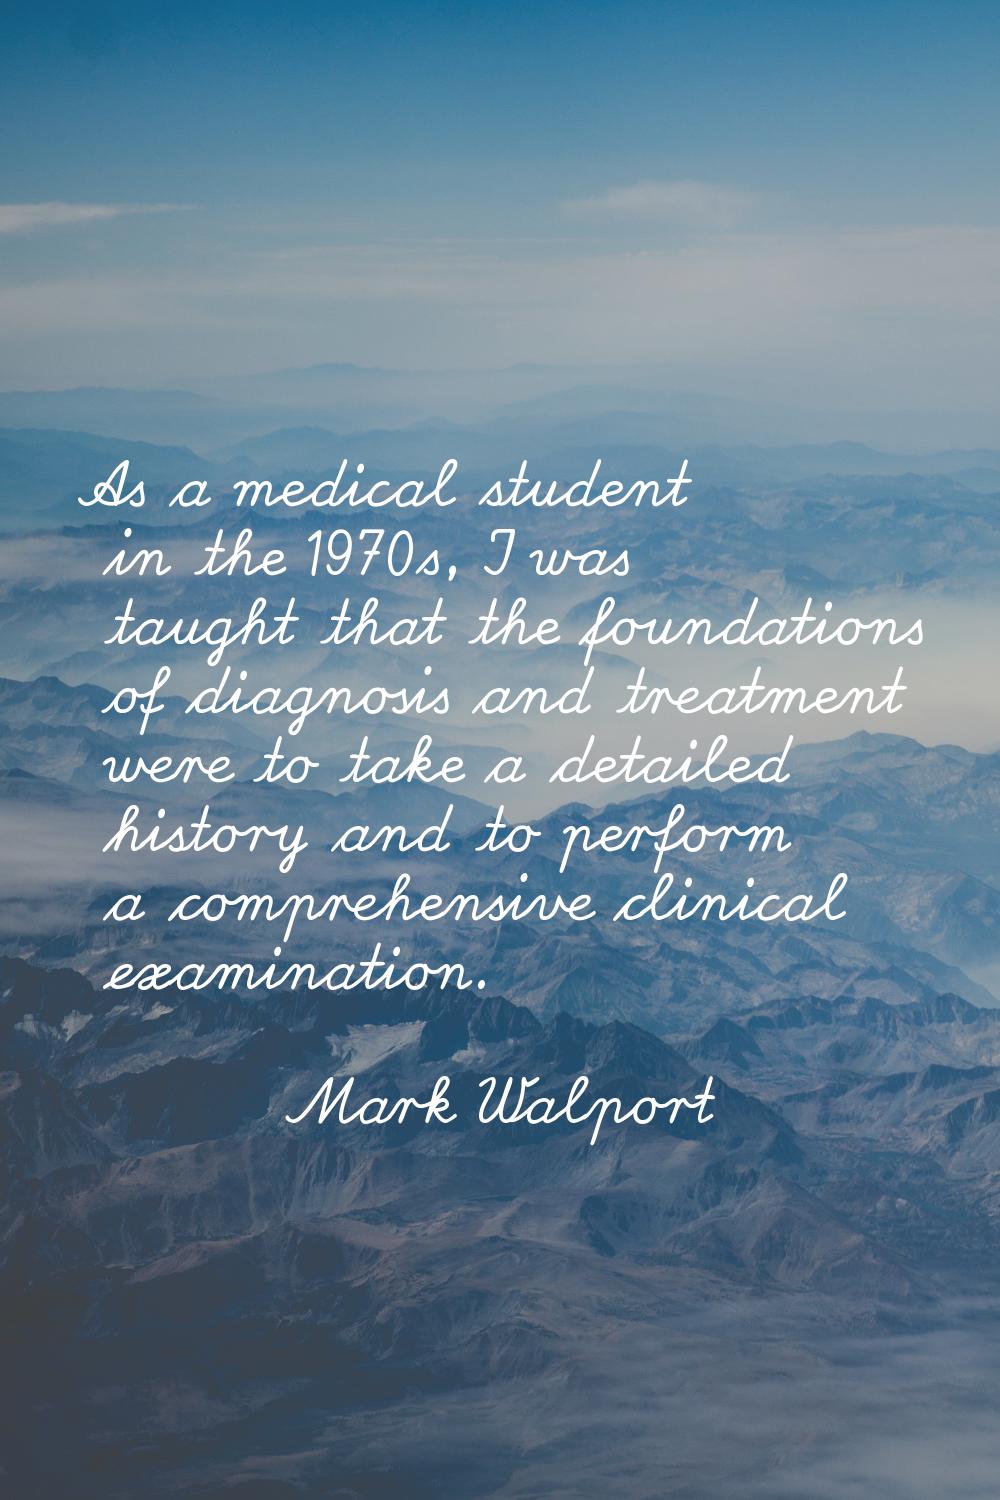 As a medical student in the 1970s, I was taught that the foundations of diagnosis and treatment wer